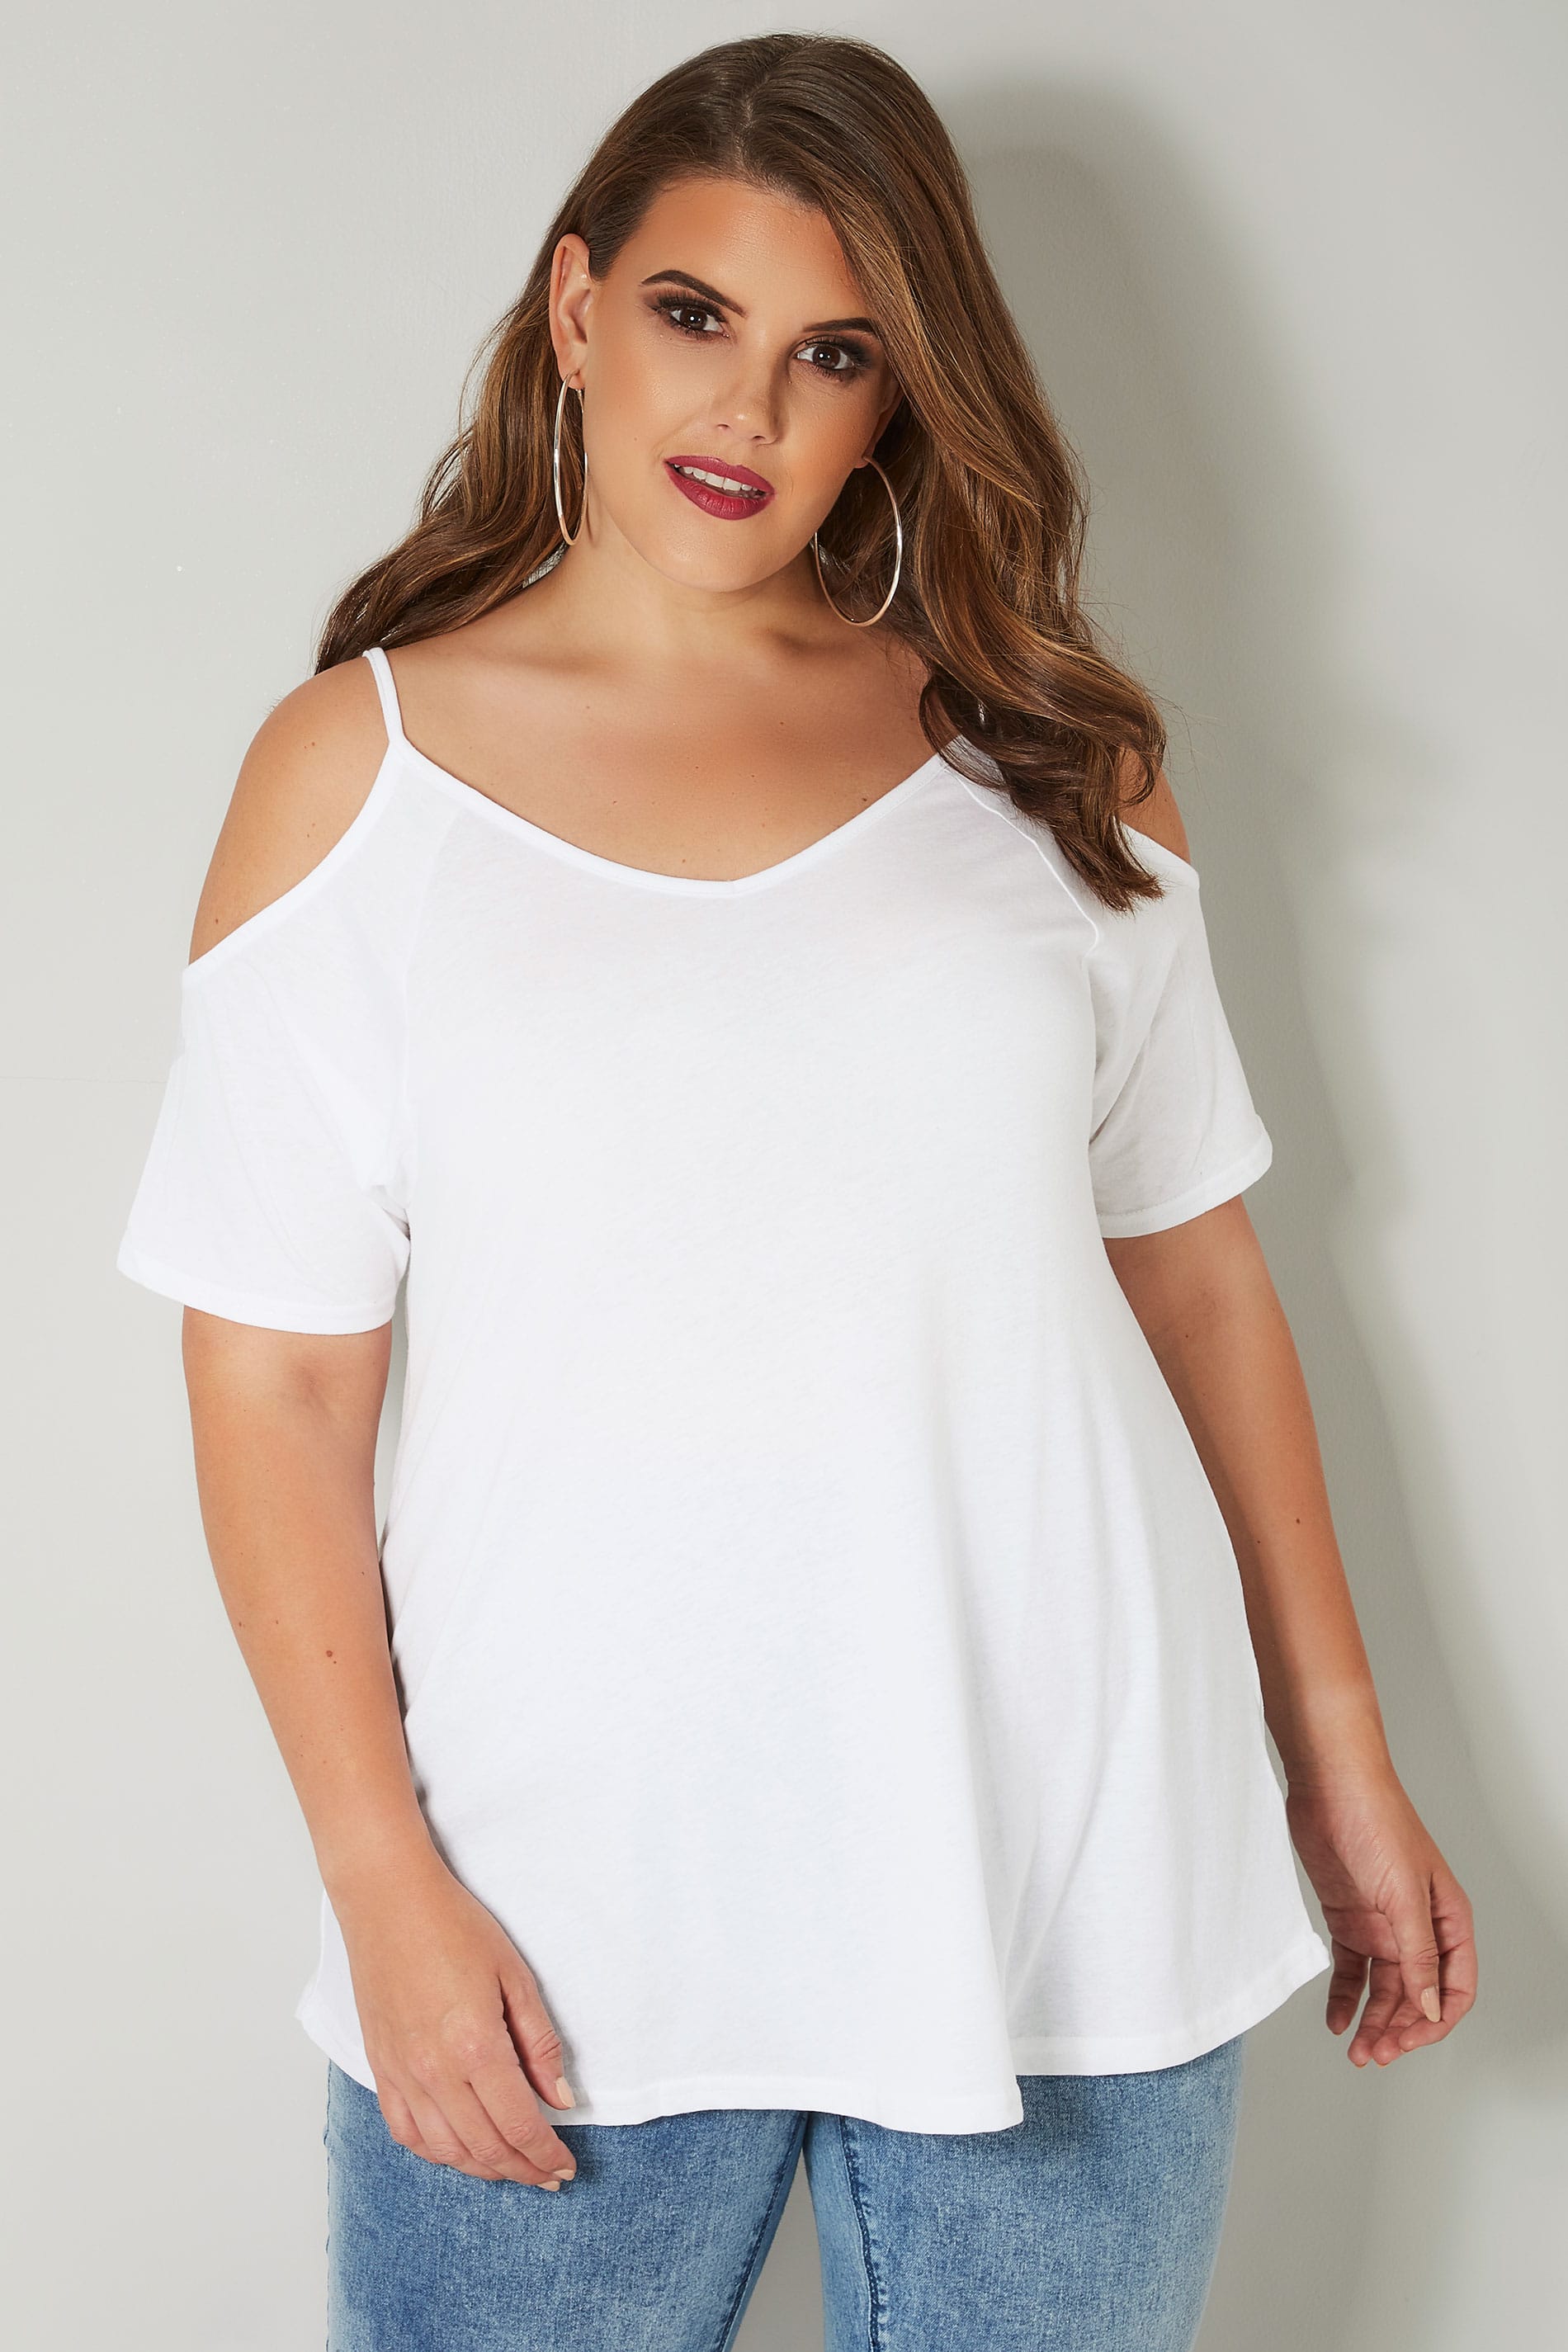 White Cold Shoulder Jersey Top, plus size 16 to 36